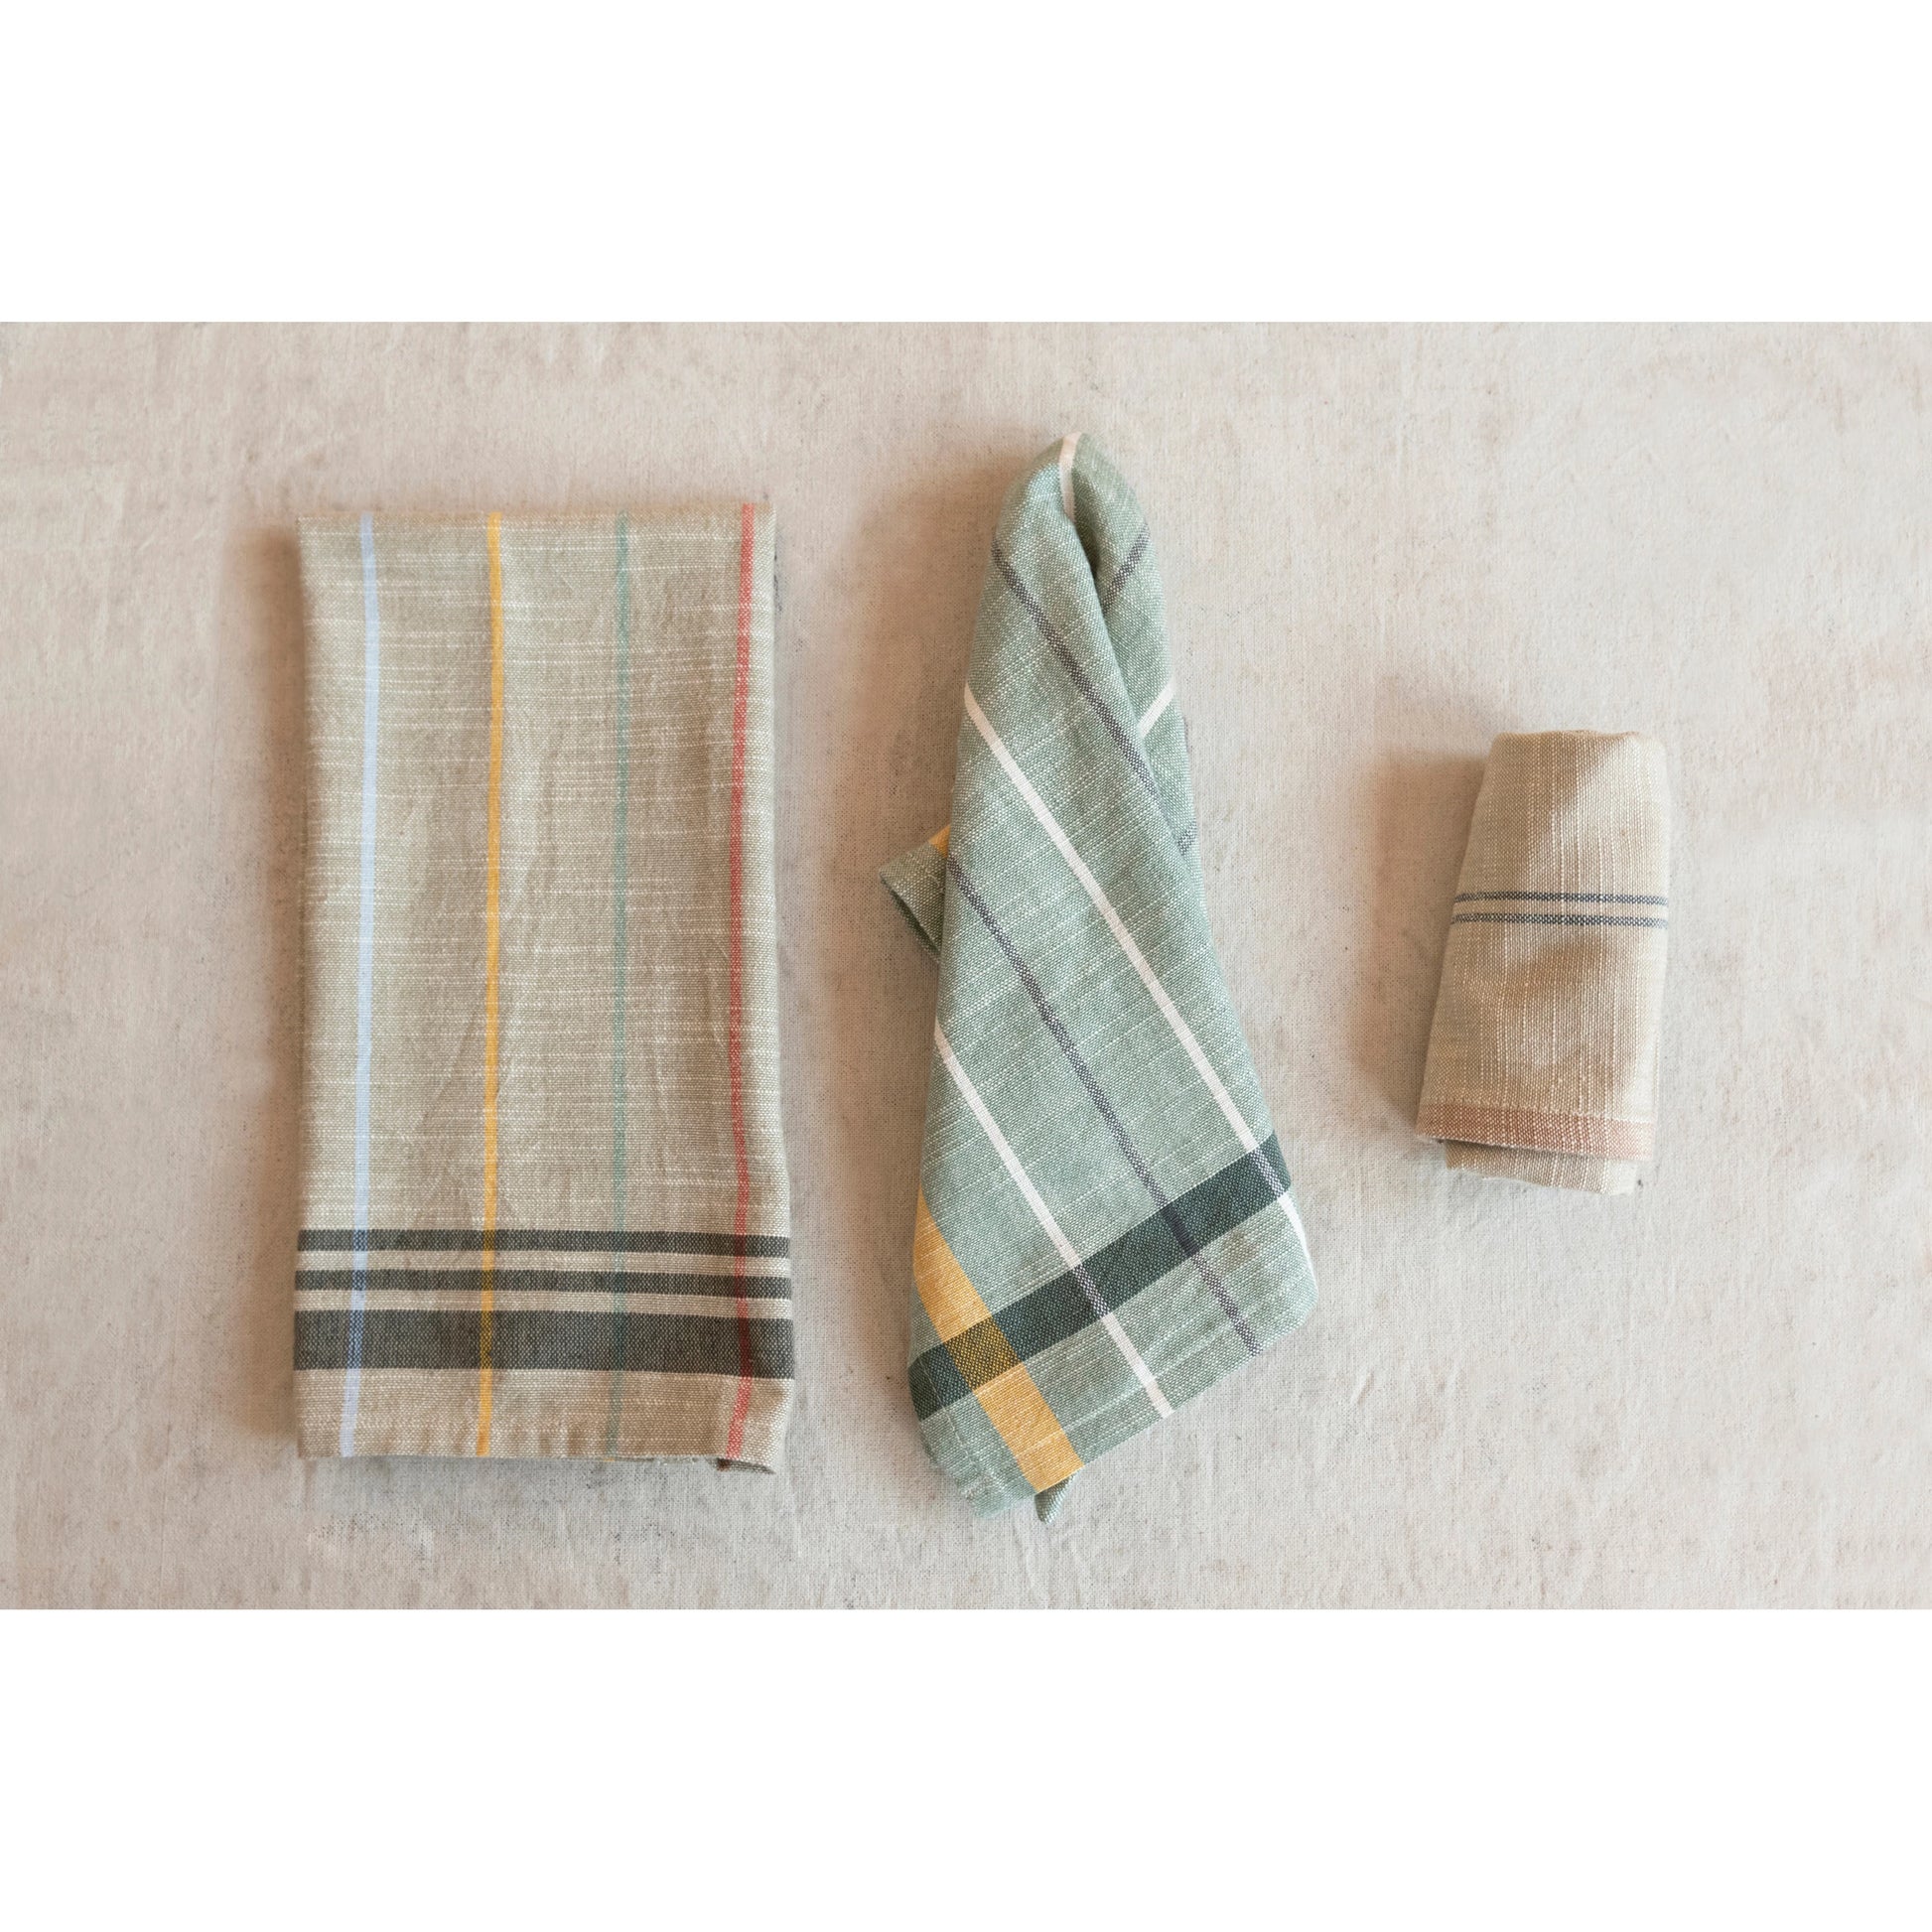 3 assorted striped towels folded or draped on a grey table.